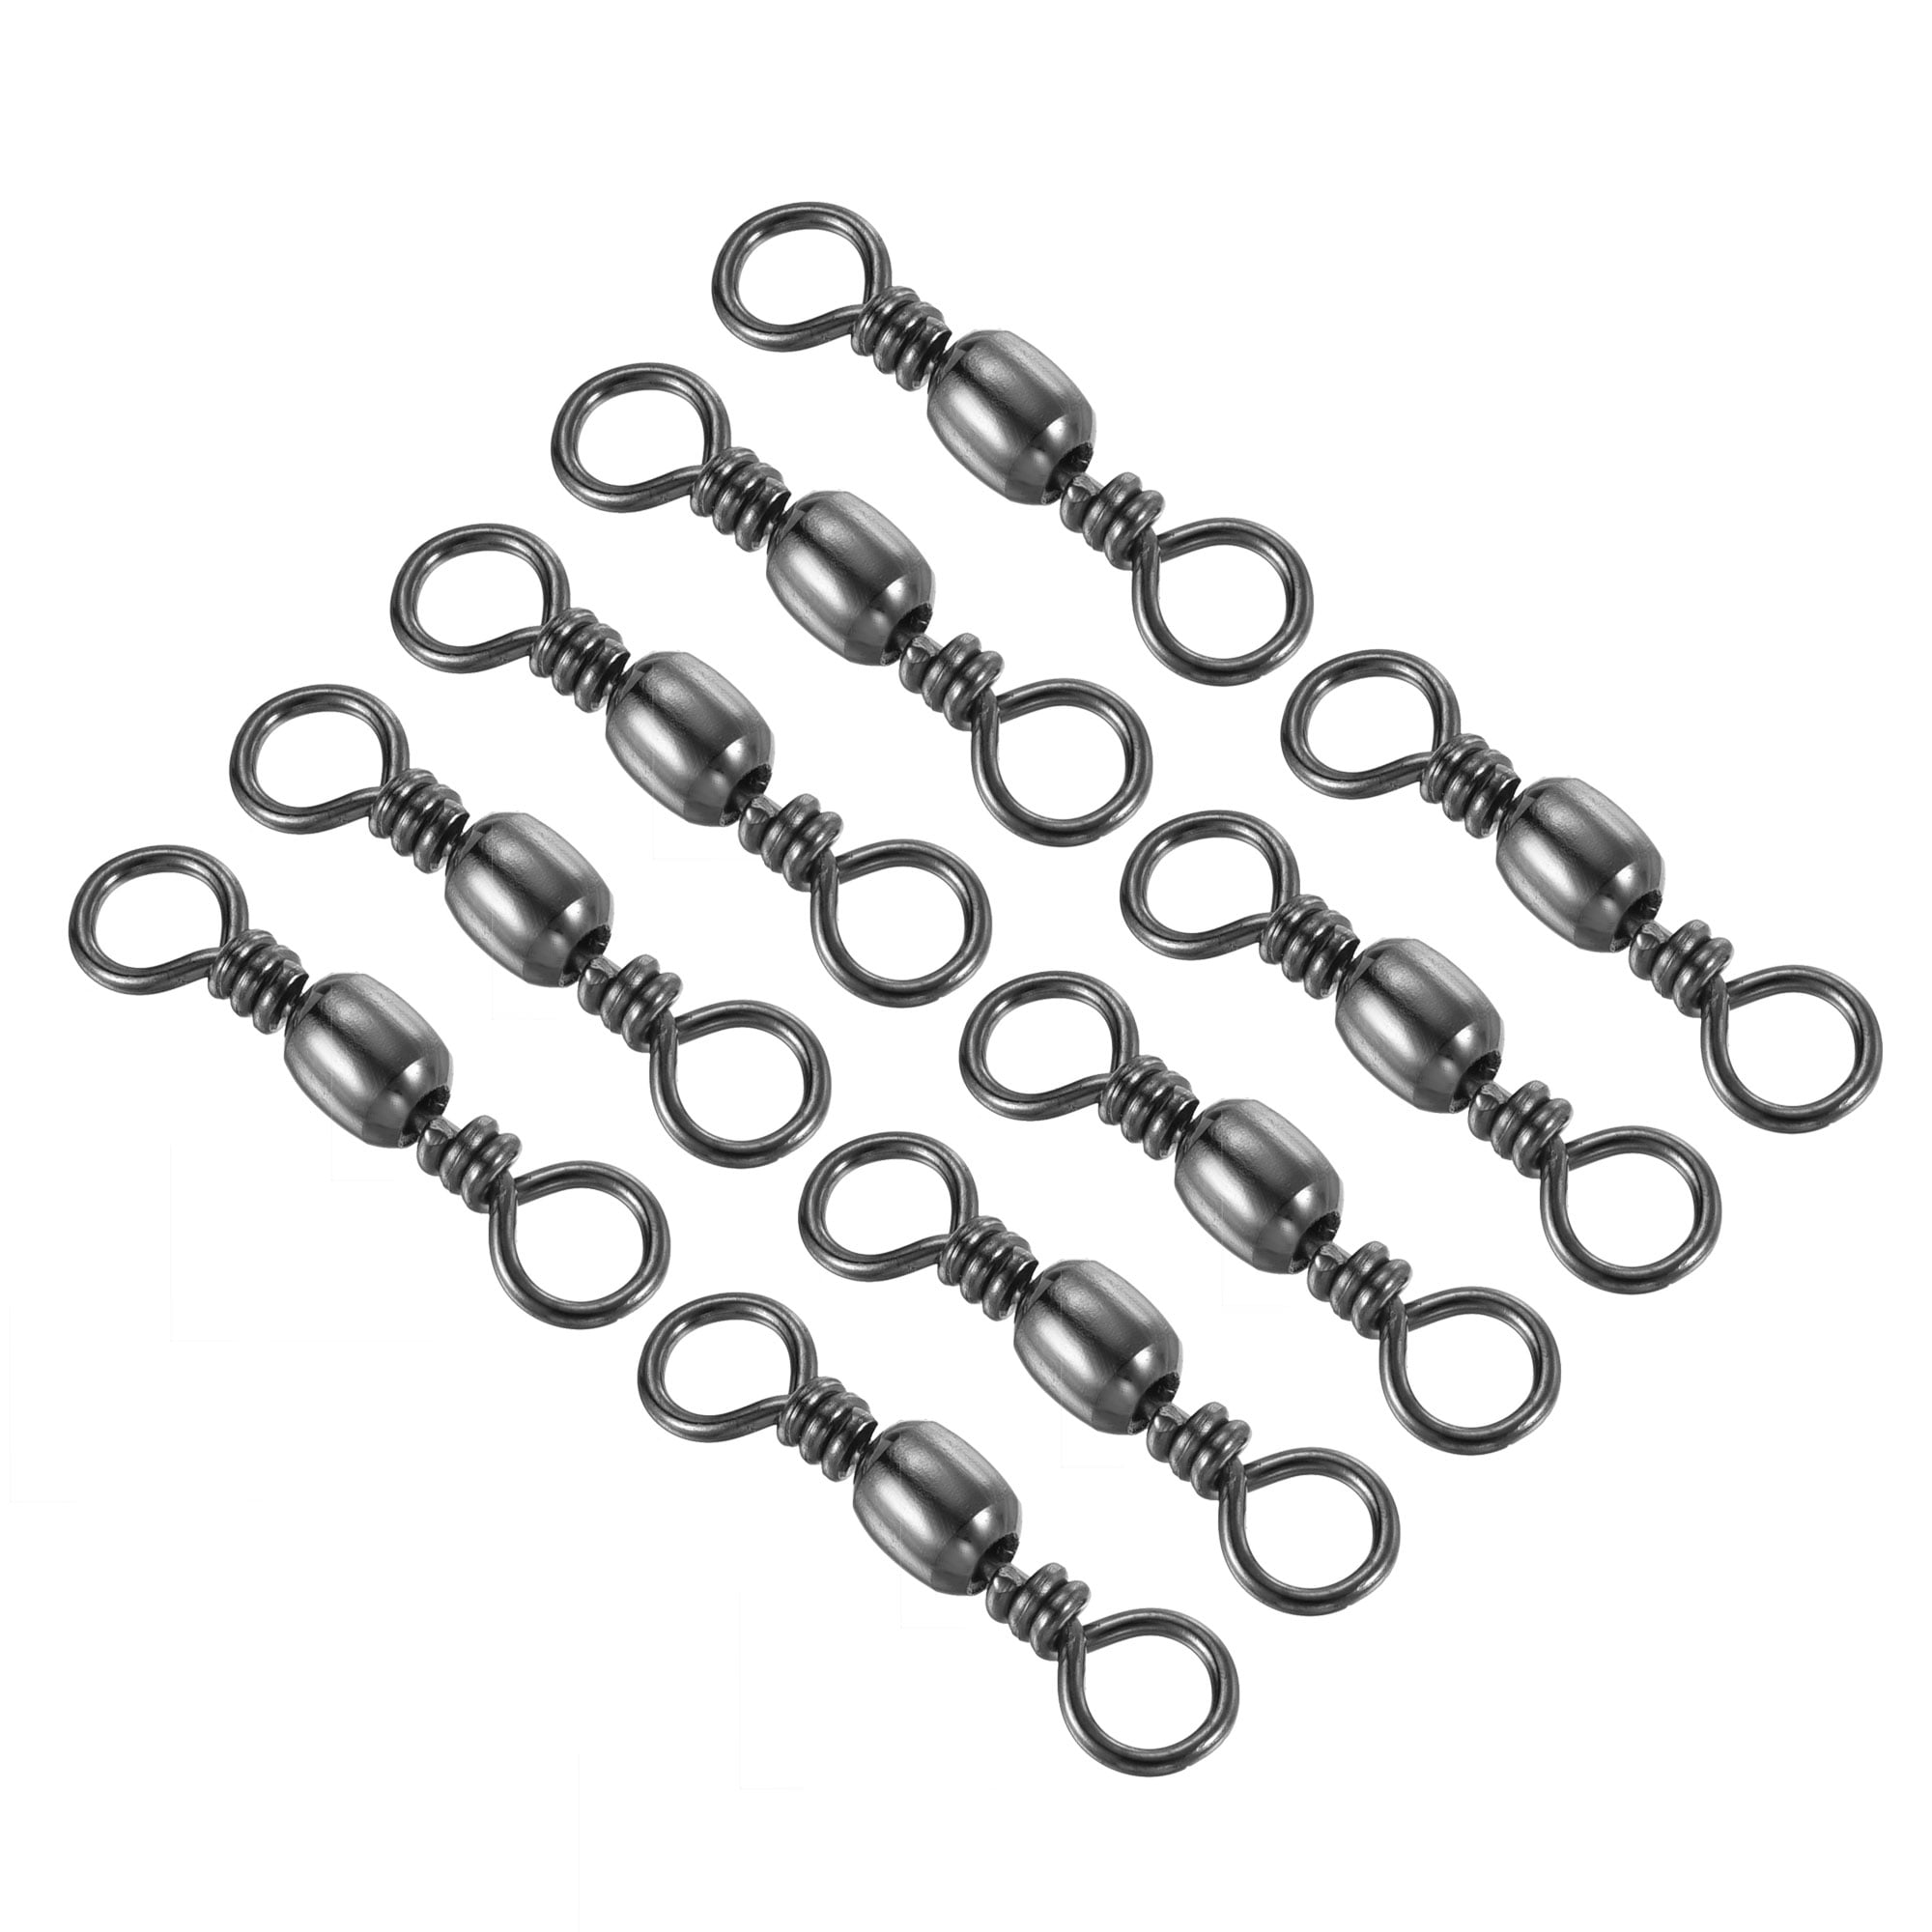 Uxcell 94lbs Stainless Steel Fishing Barrel Swivels, Black 50 Pack